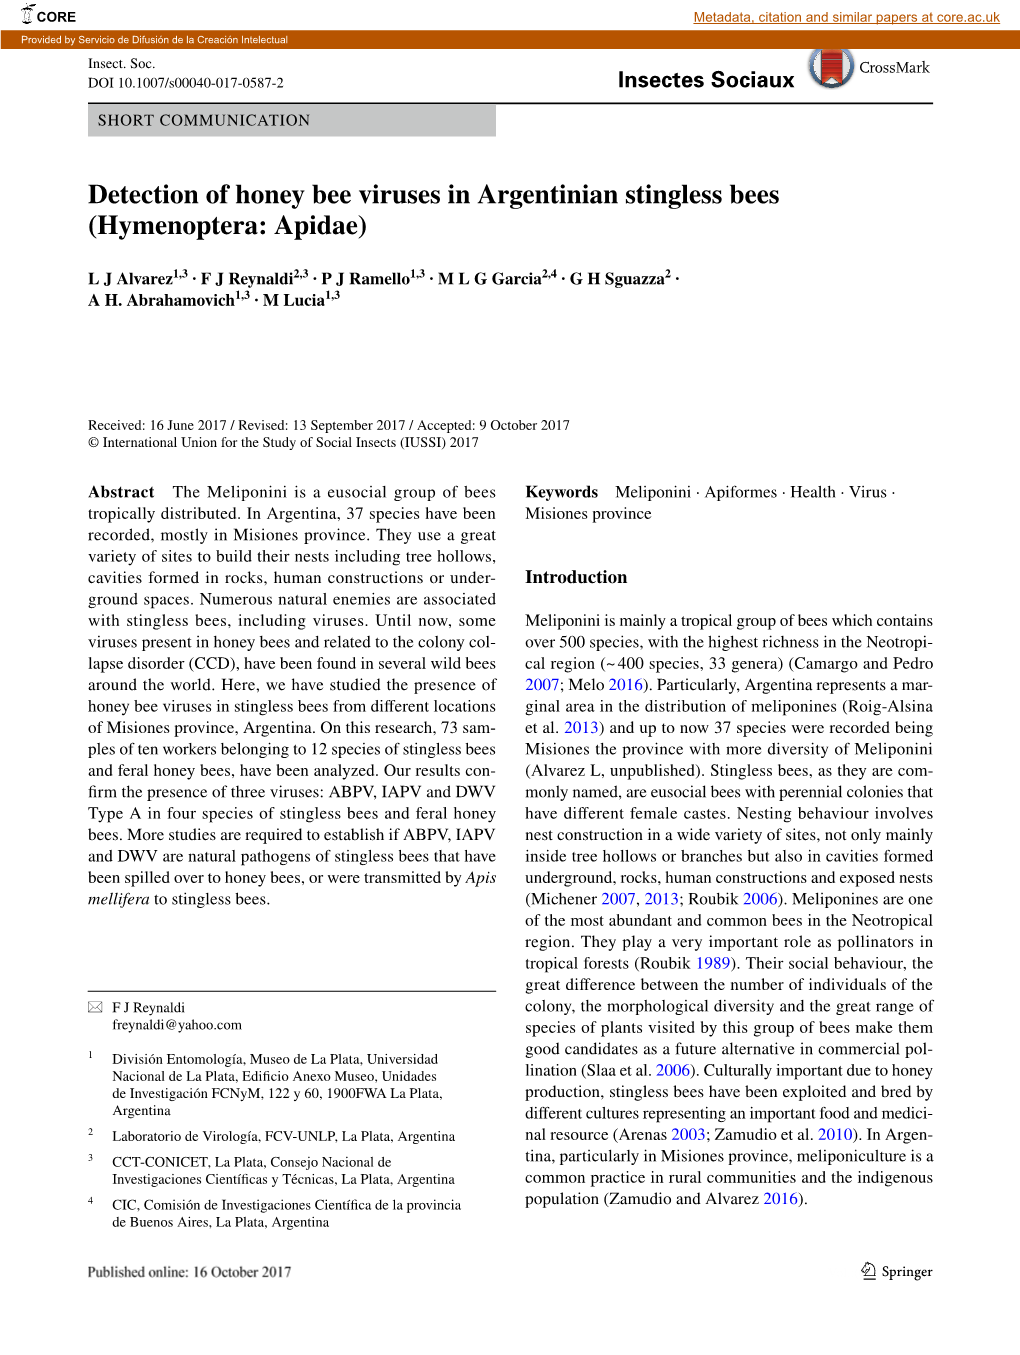 Detection of Honey Bee Viruses in Argentinian Stingless Bees (Hymenoptera: Apidae)